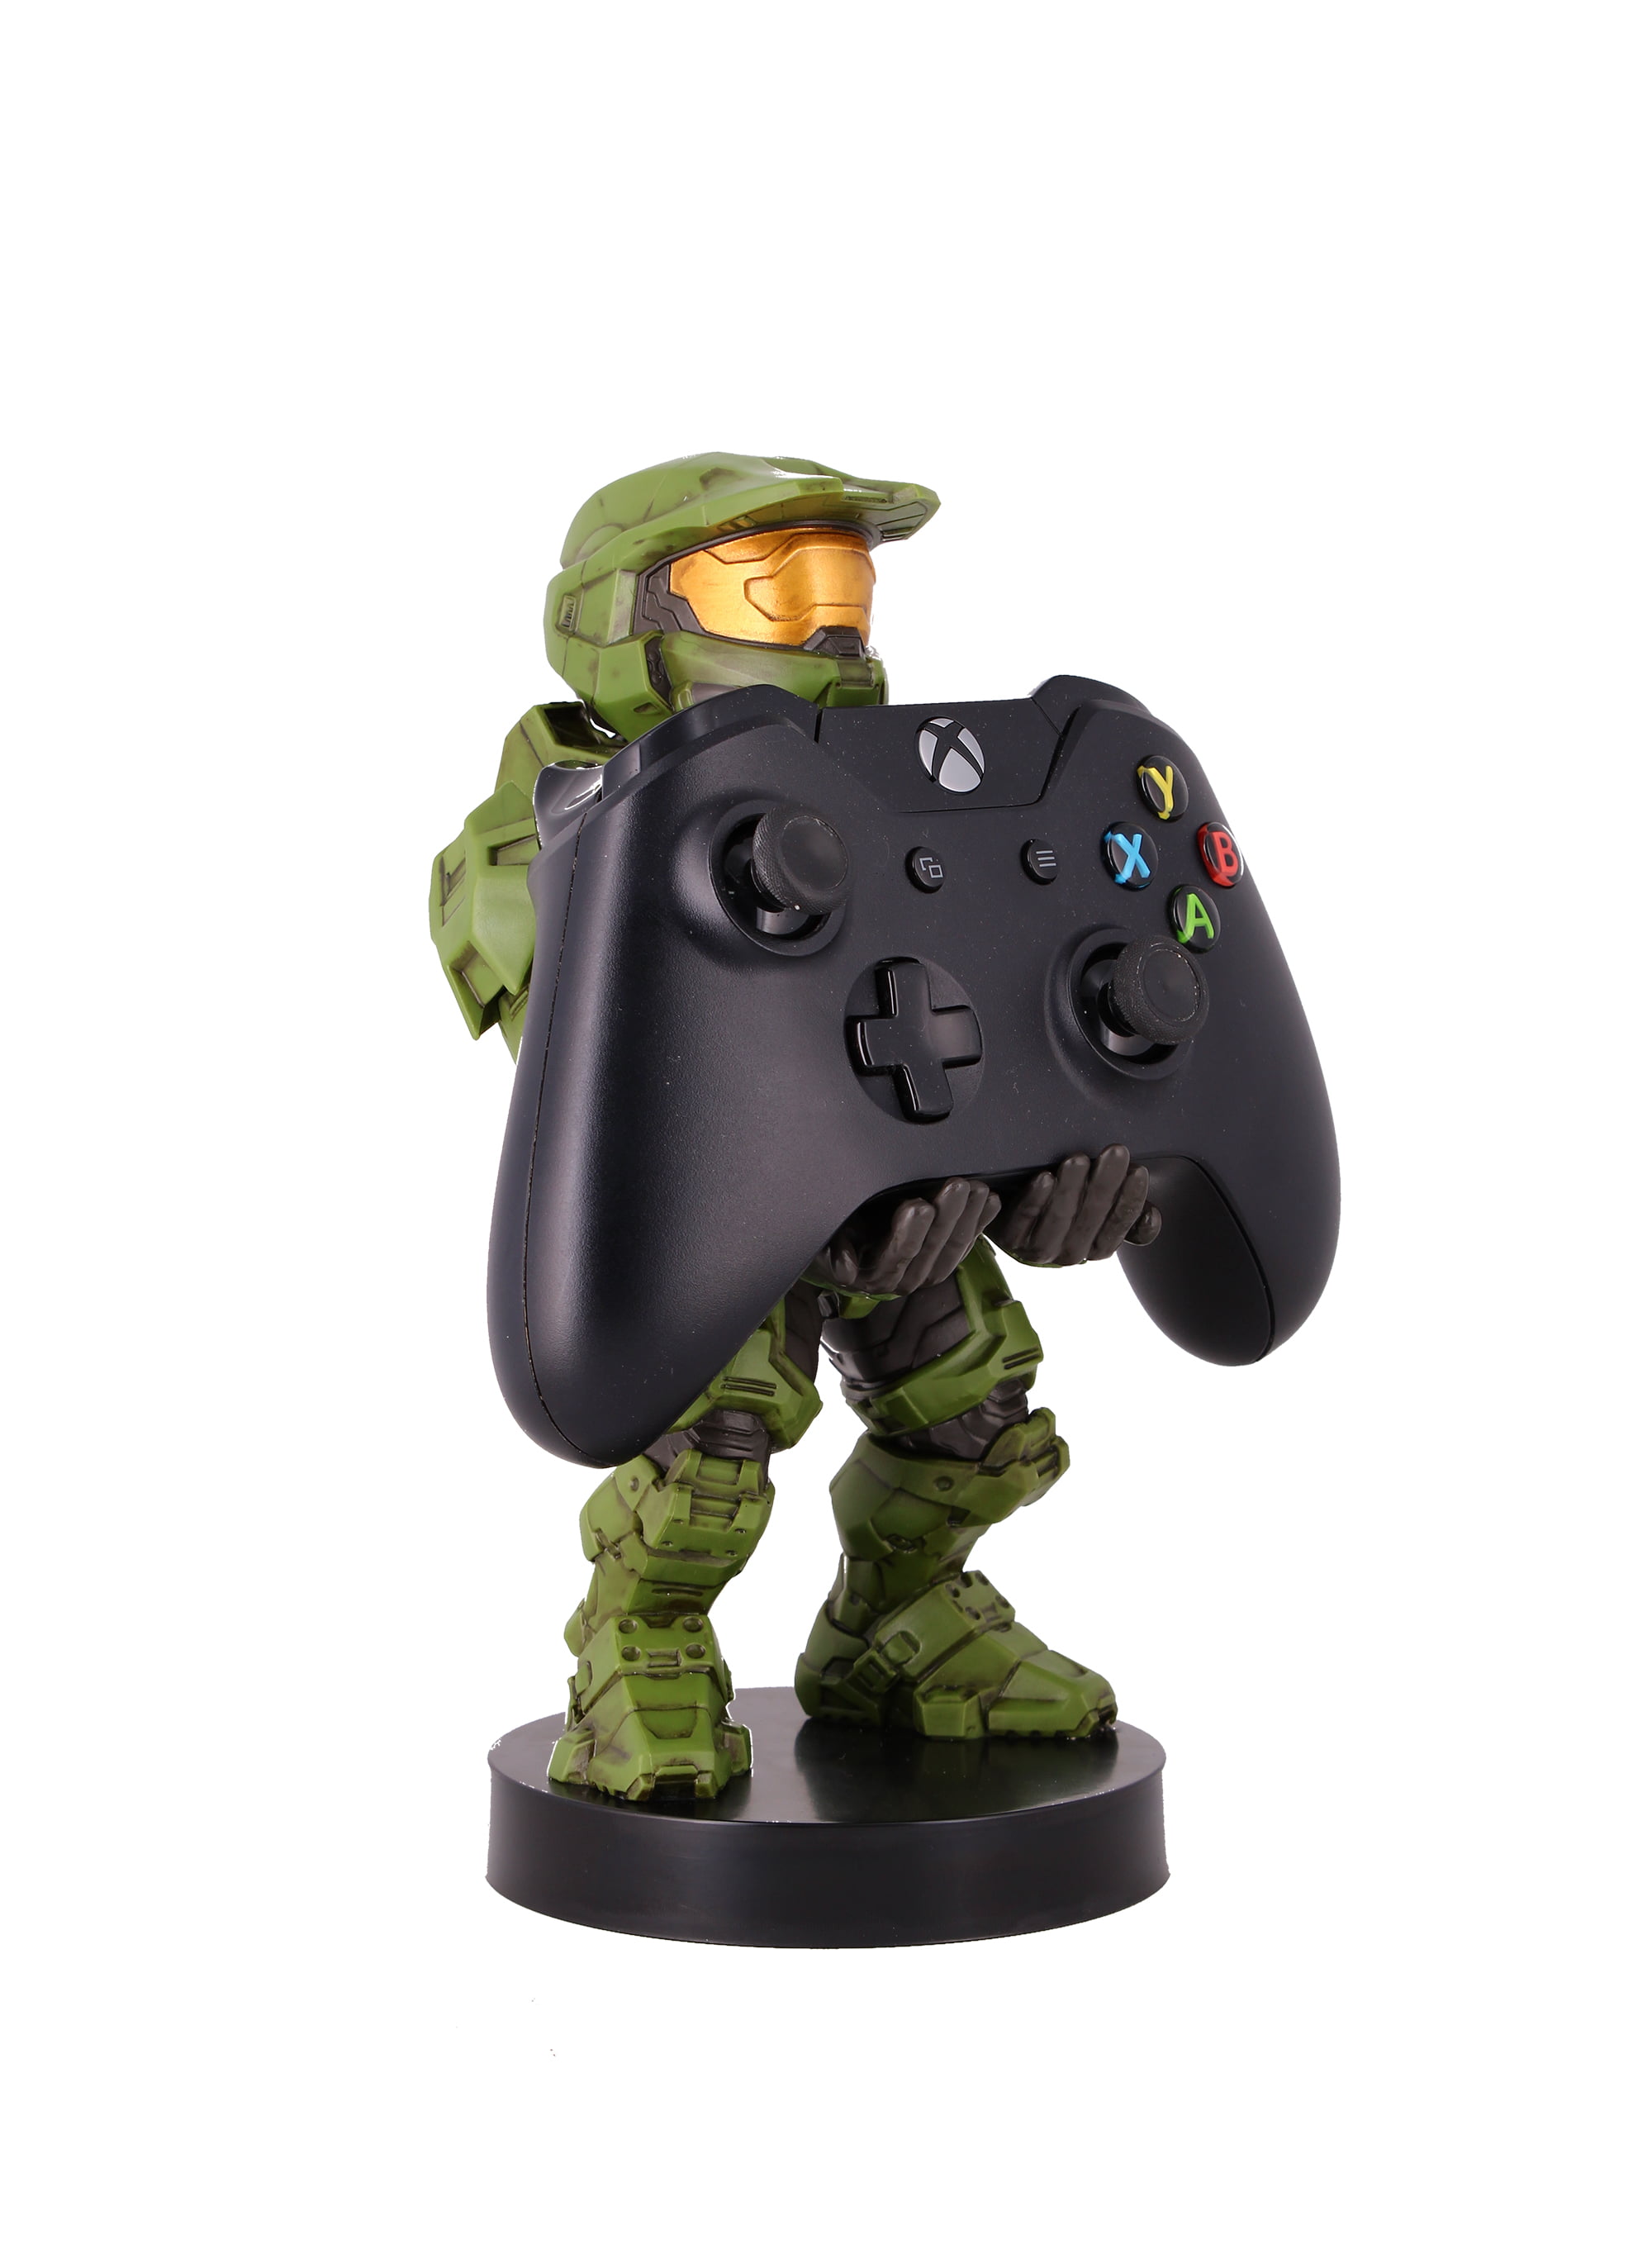 Controller Holder Figure Halo Masterchief Battery Cable Guys Smartphone 